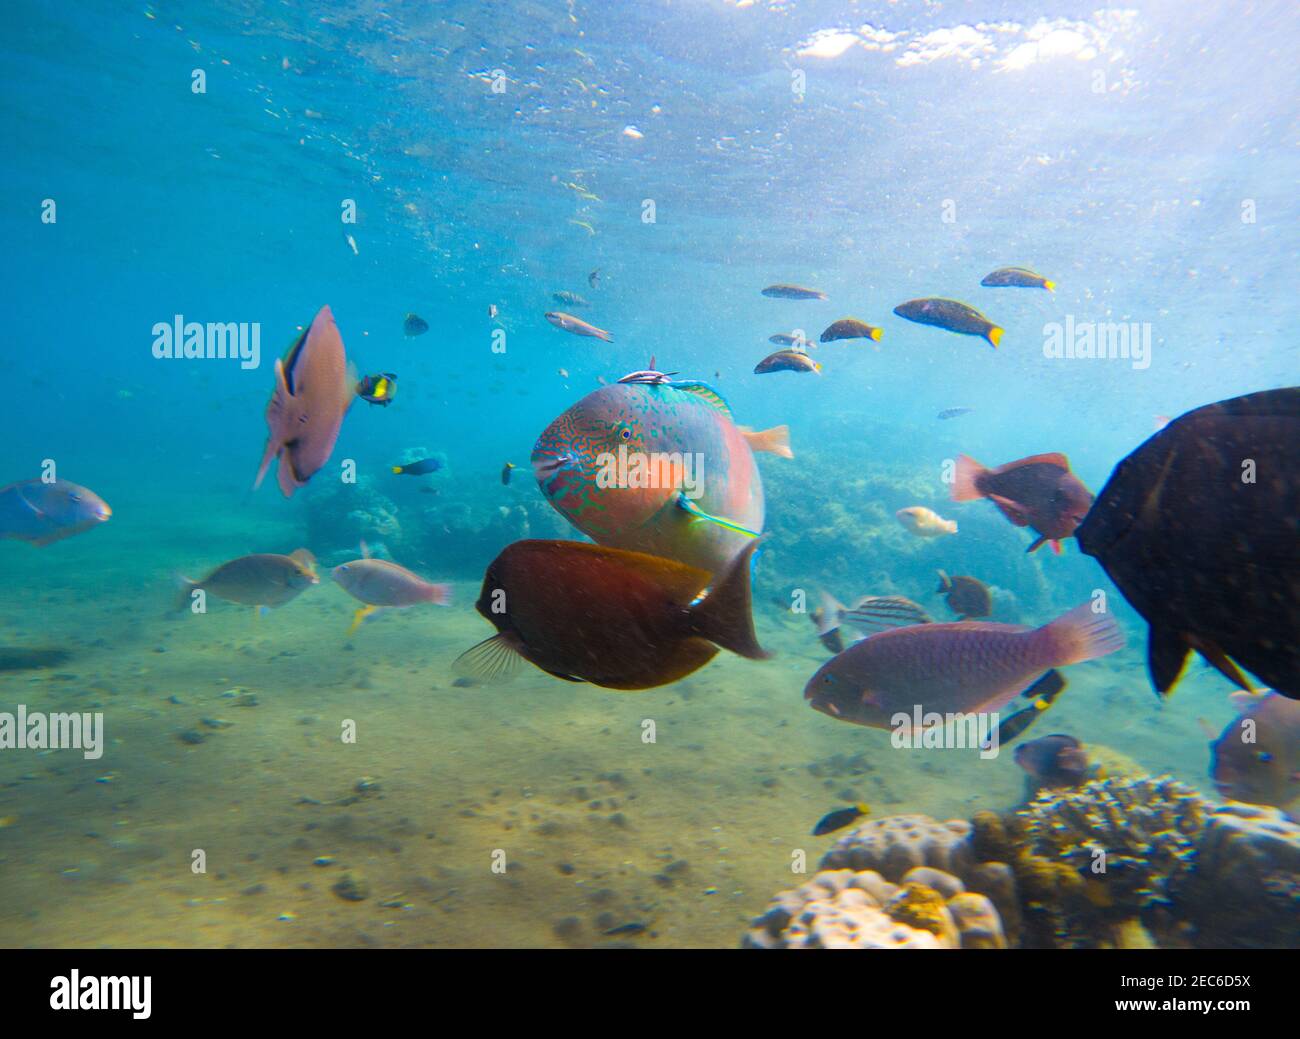 Underwater seaview with tropical fish school. Young coral formation and coral fish shoal. Butterflyfish, parrotfish, surgeonfish. Aquarium fish in wil Stock Photo